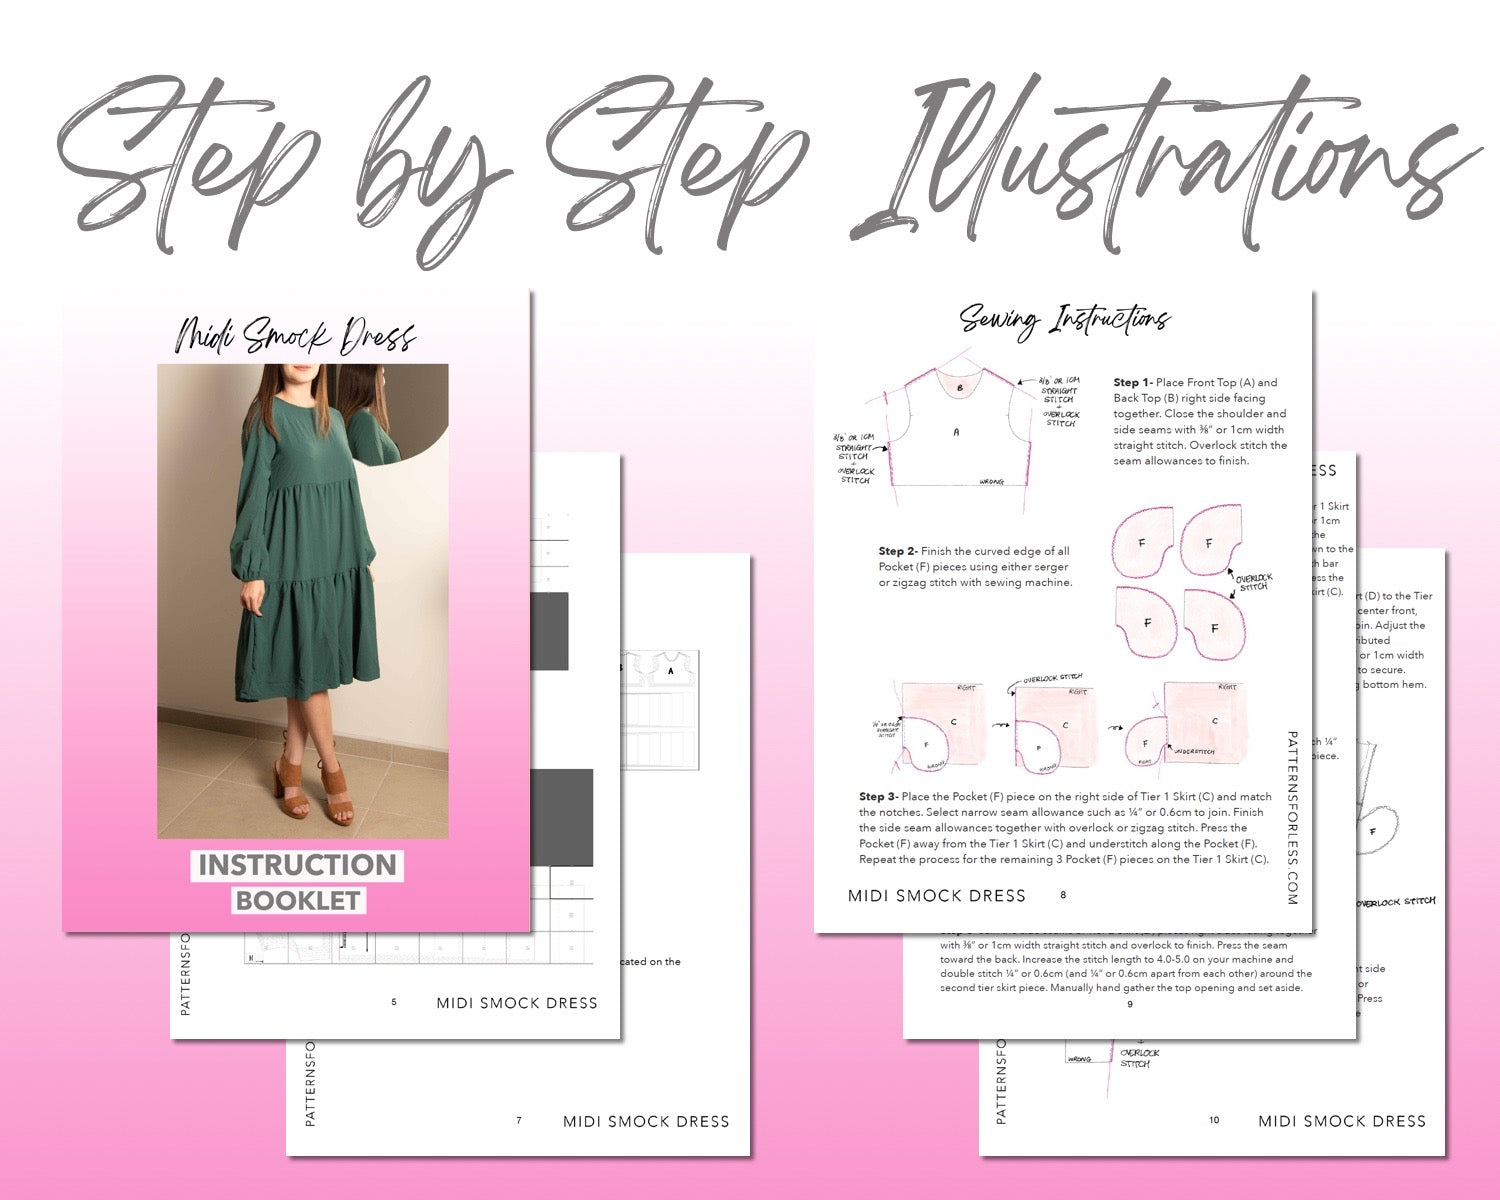 Midi Smock Dress sewing pattern step by step illustrations.